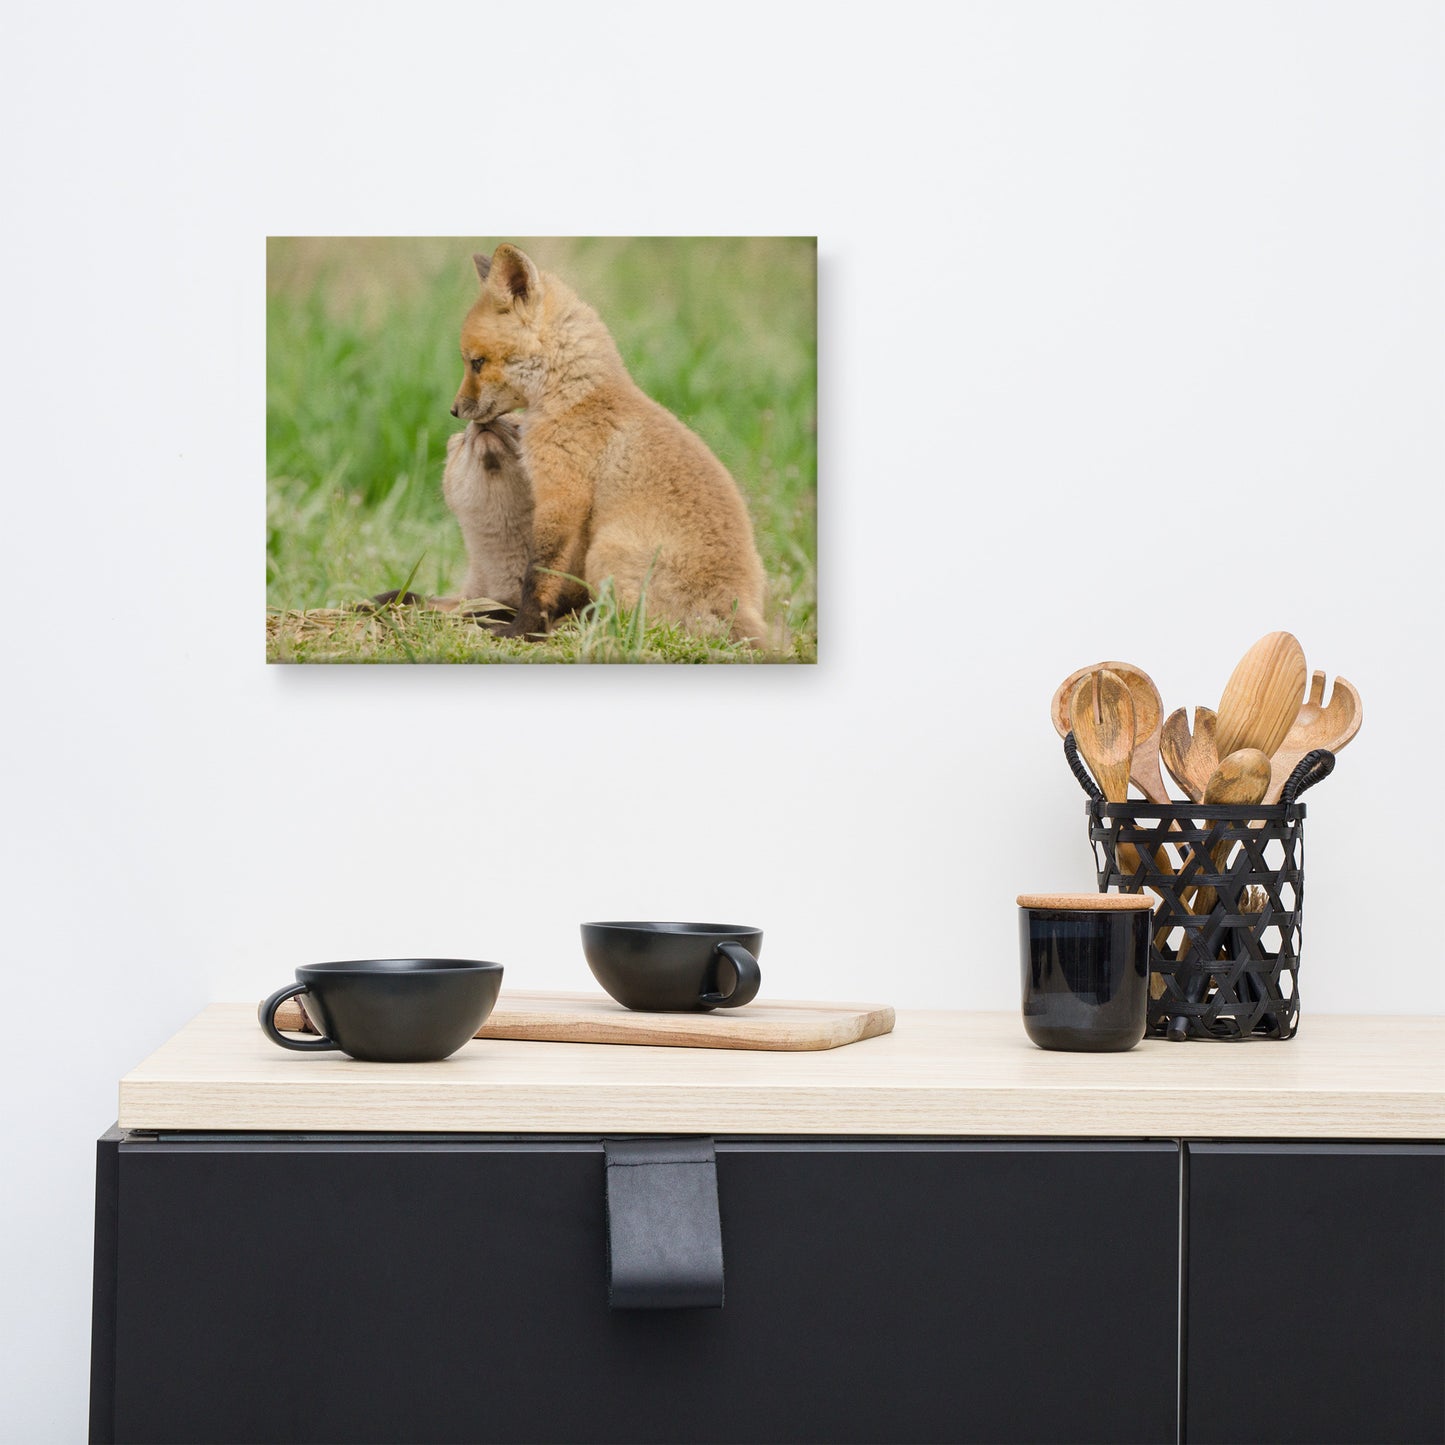 Baby Red Foxes Sibling Kisses Animal Wildlife Photograph Canvas Wall Art Prints